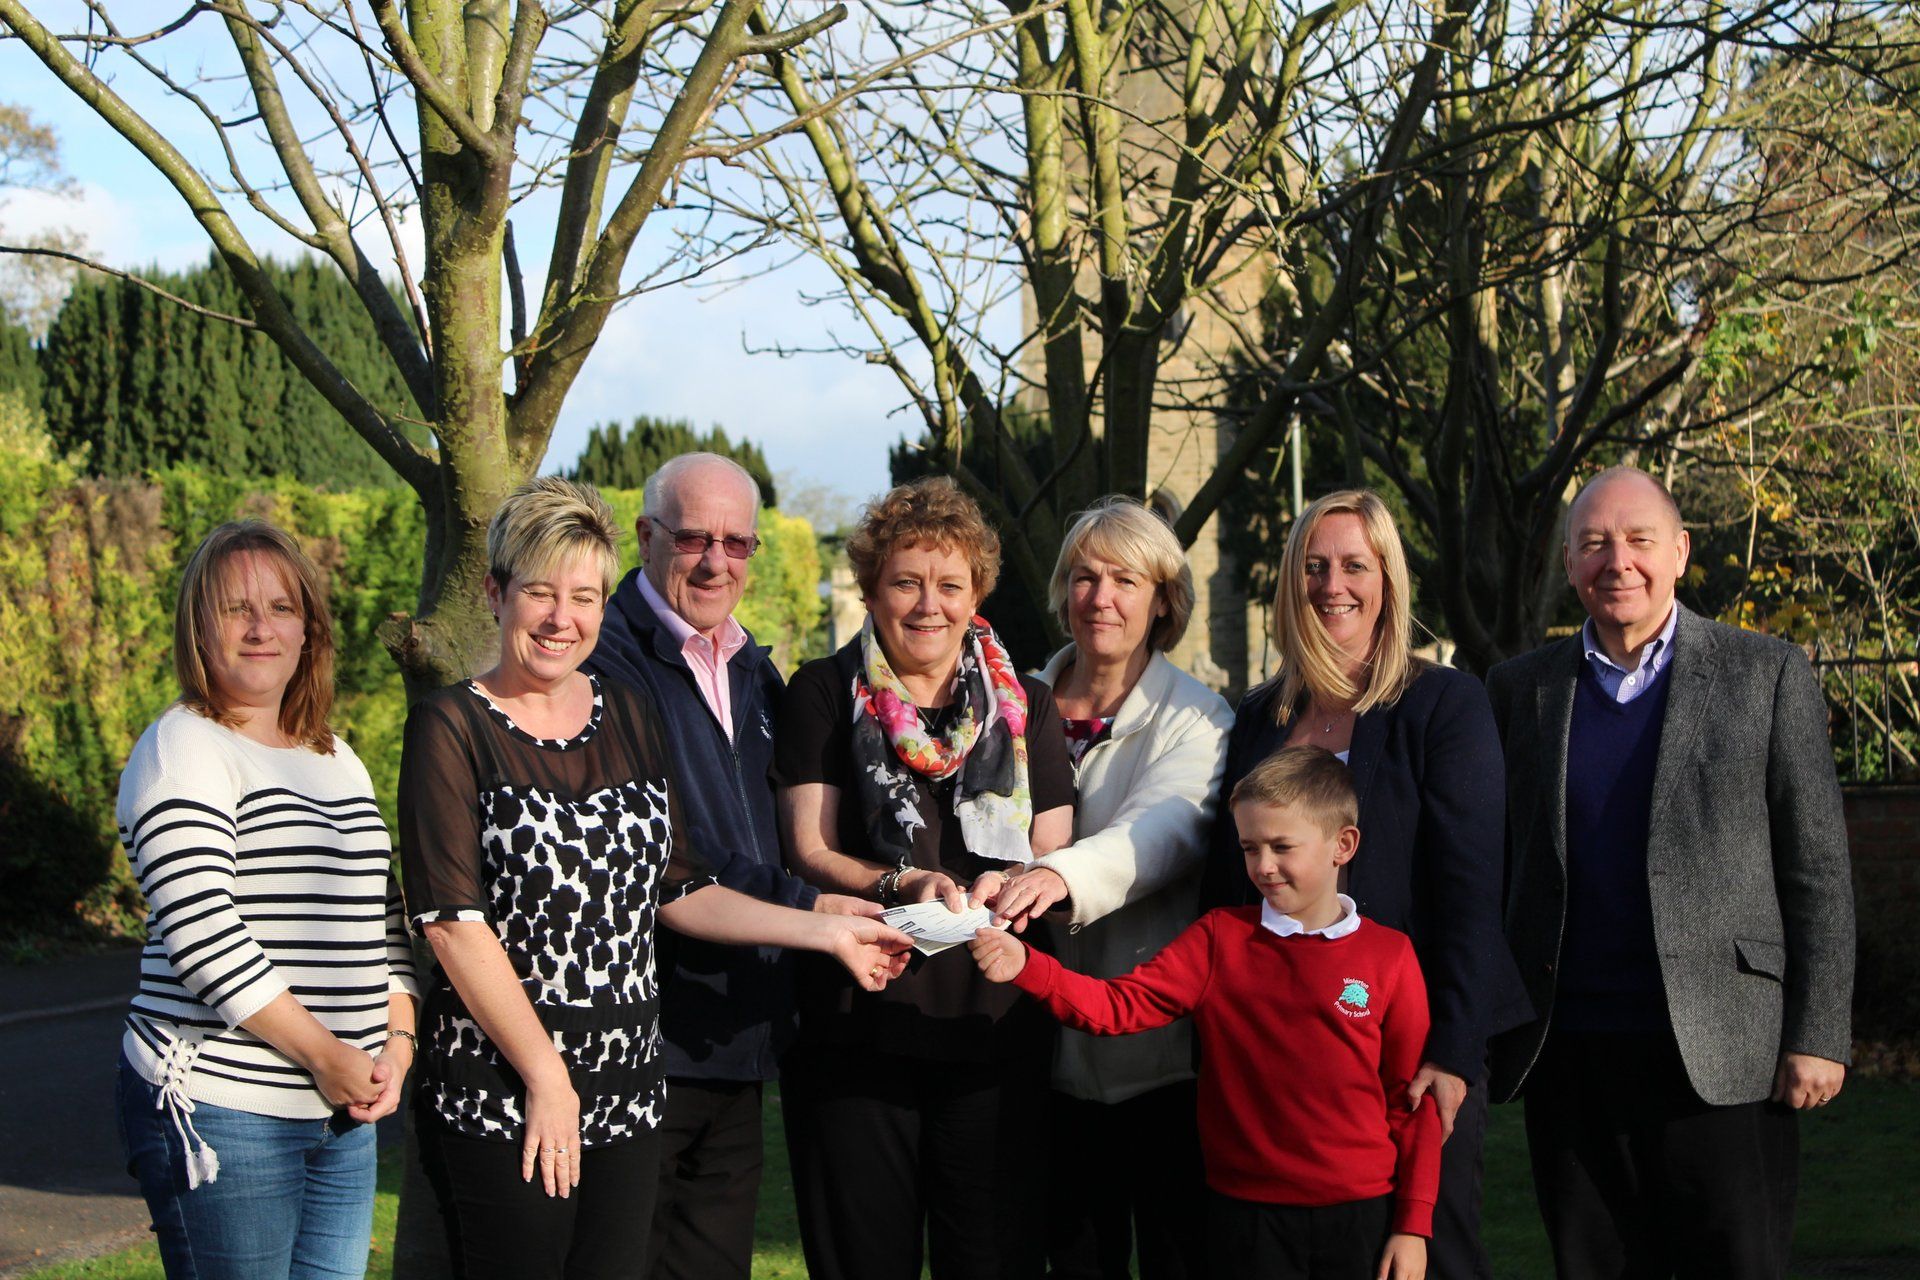 Local organisations receive donation from Misterton Gala Committee